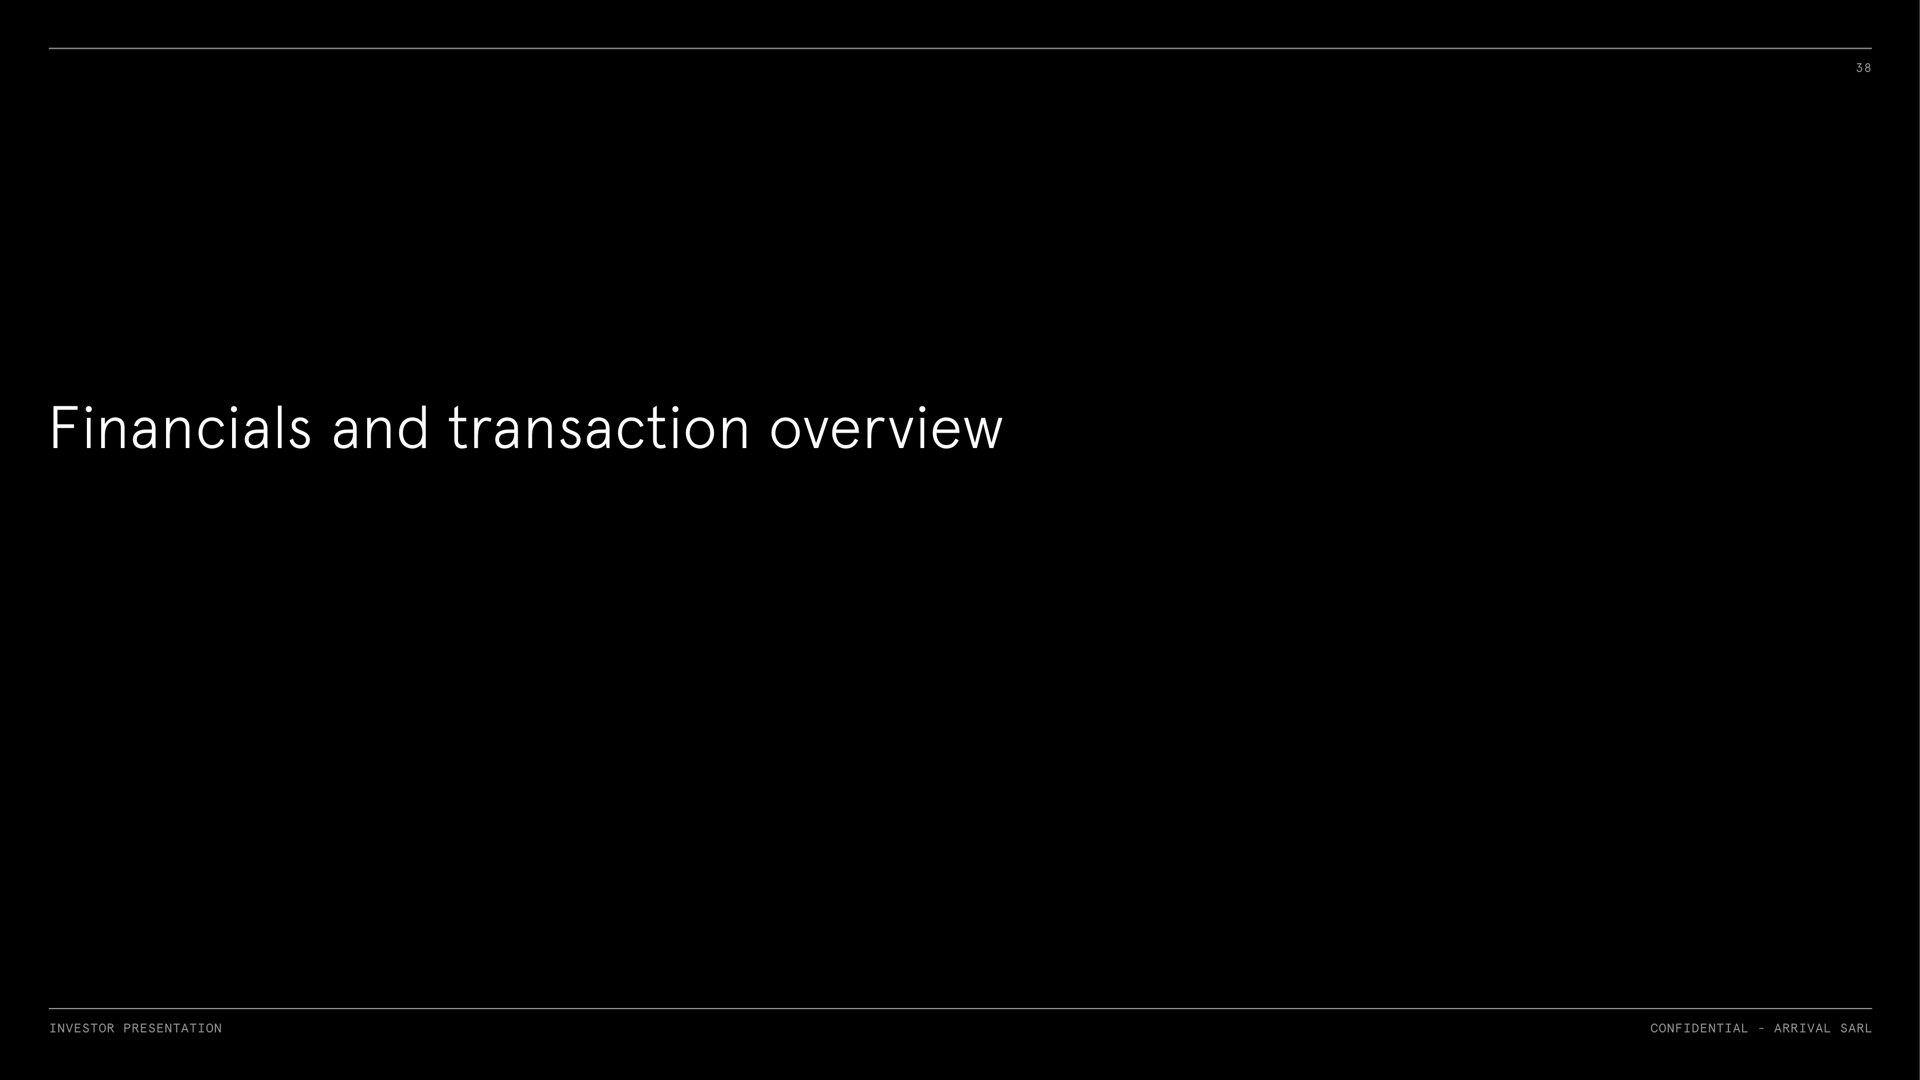 and transaction overview | Arrival